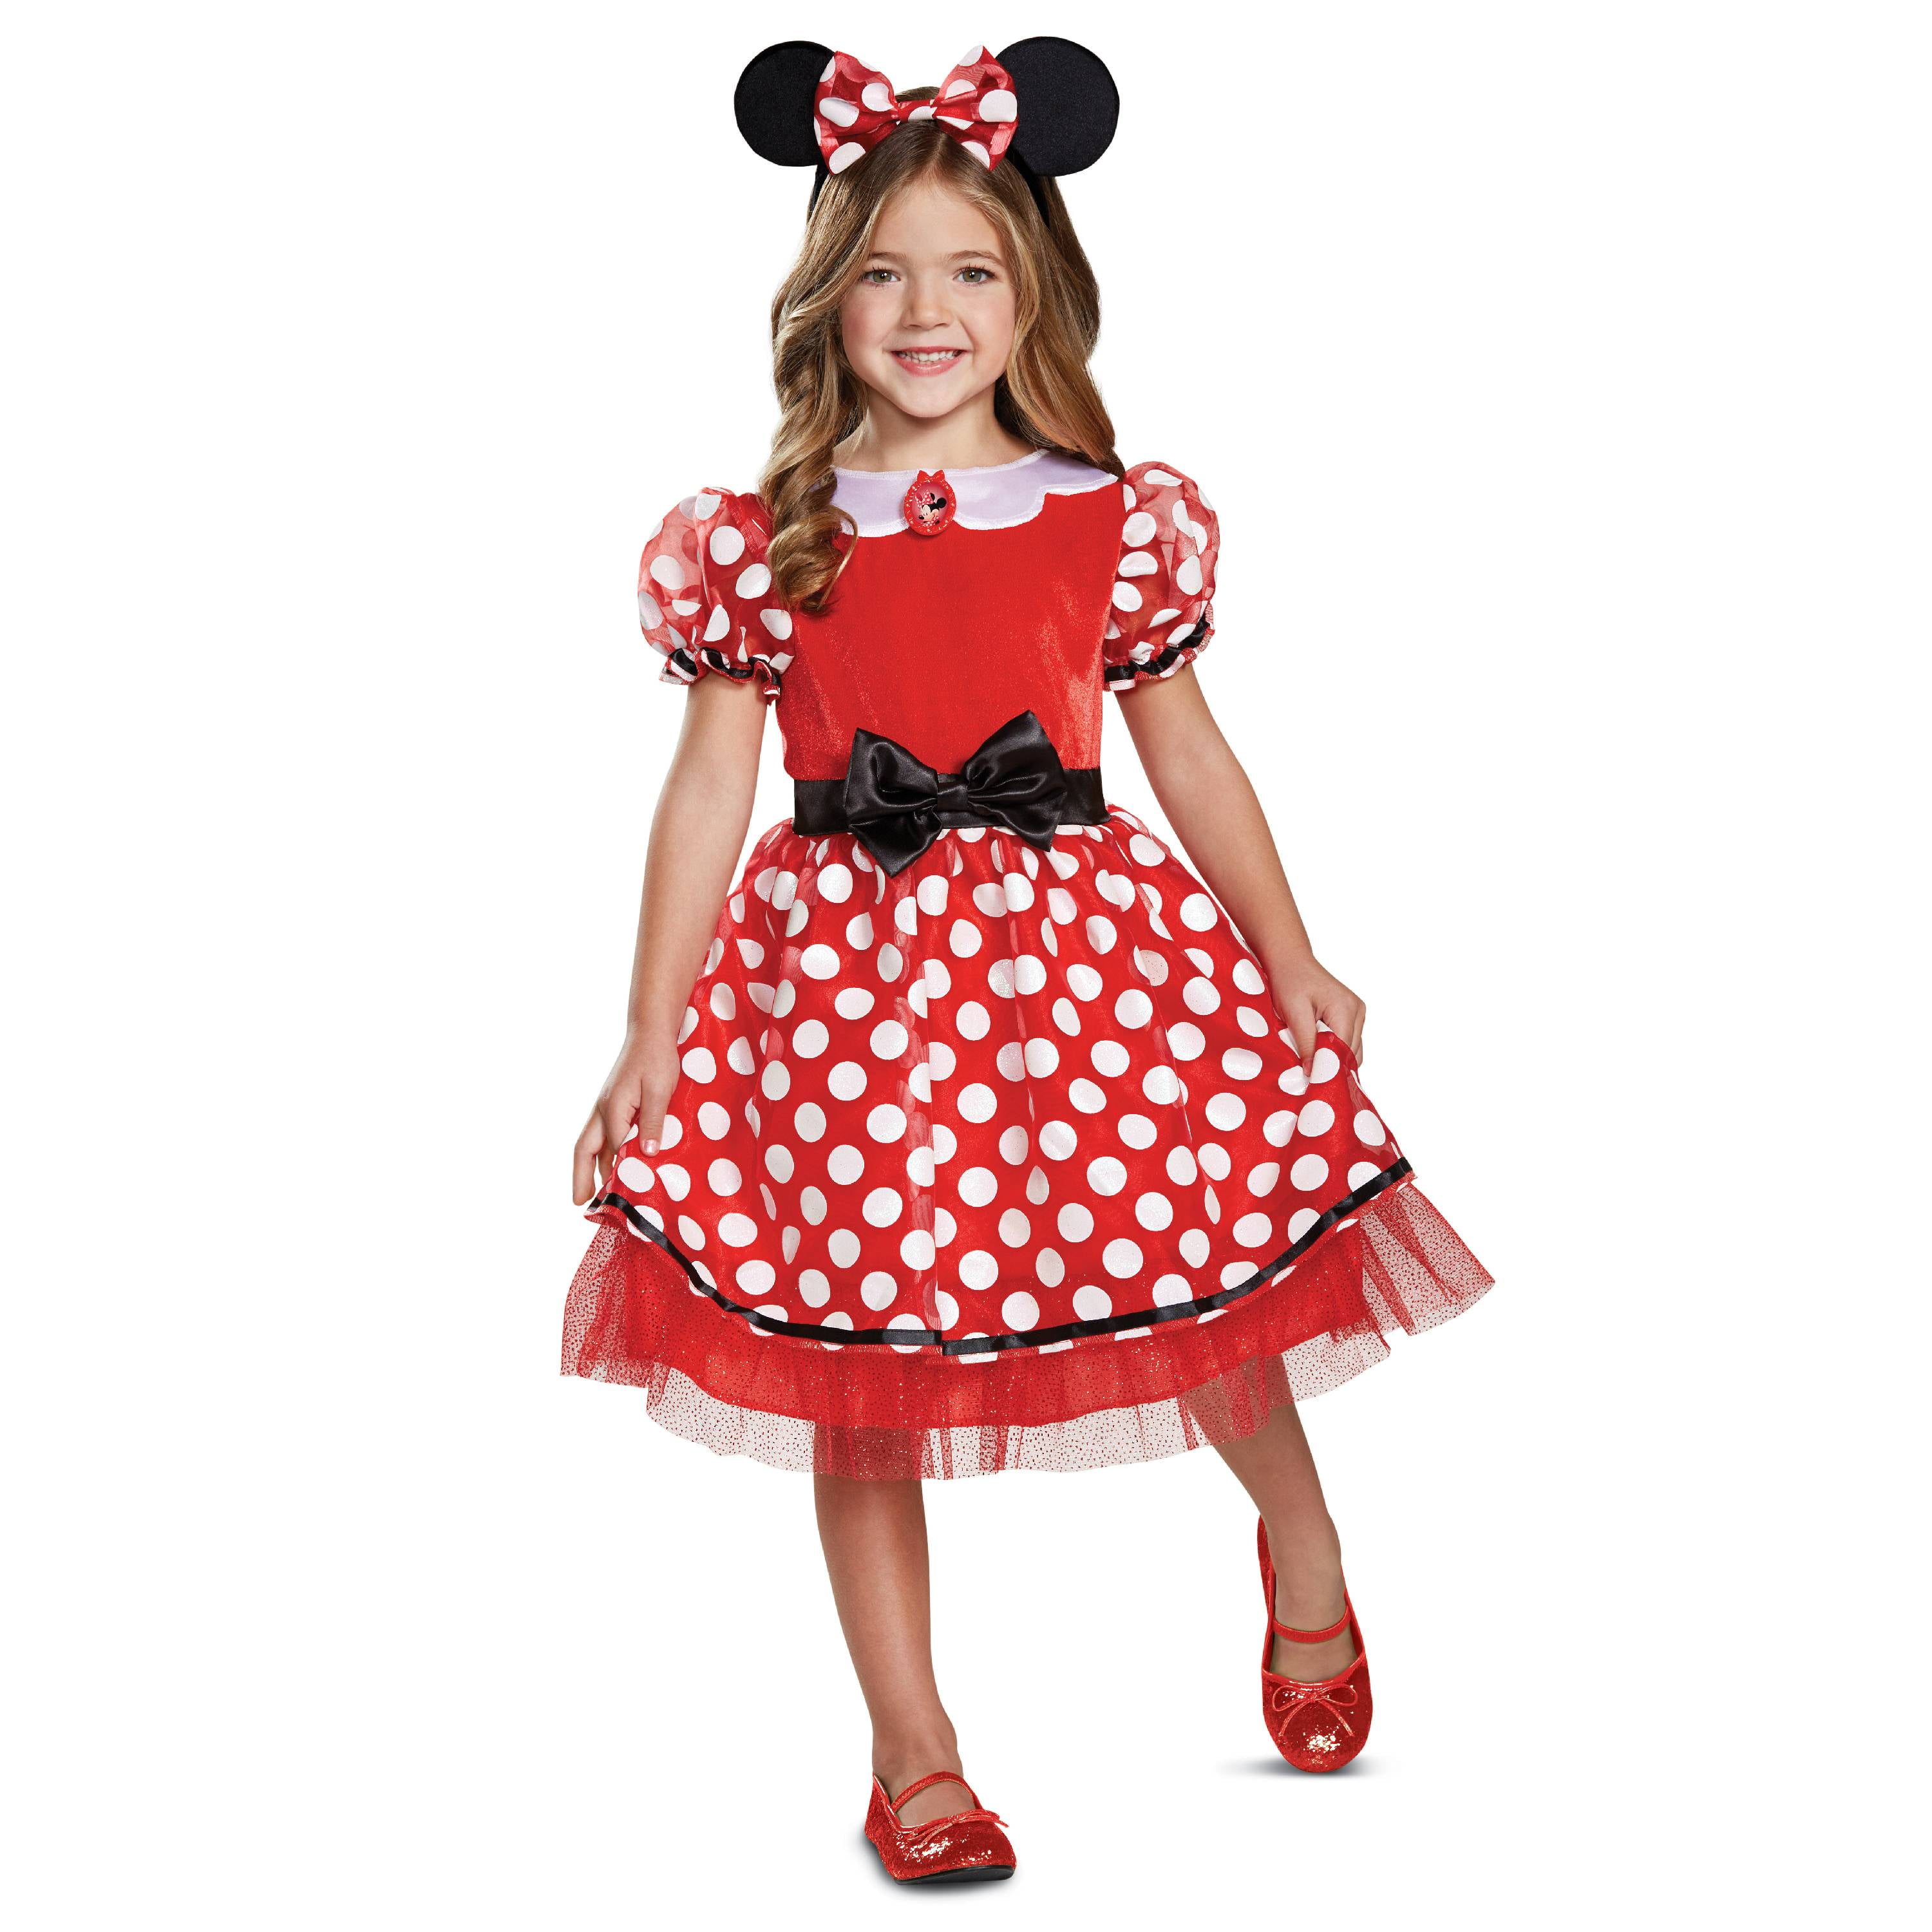 Minnie Mouse Costume For Adults & Kids